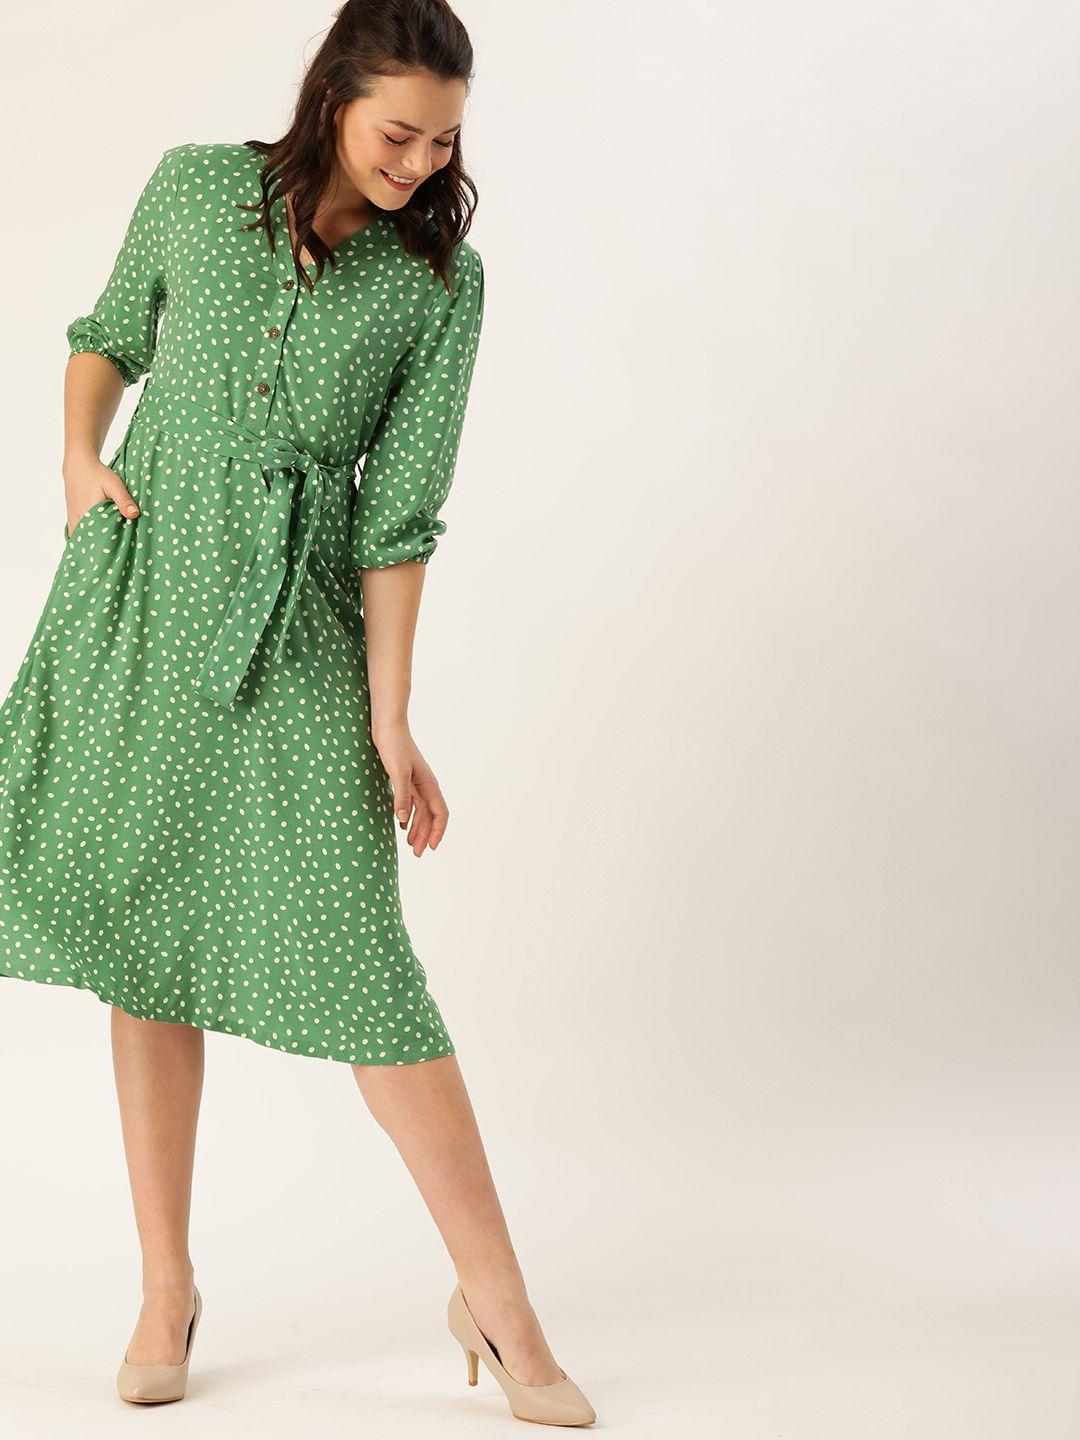 dressberry green & white polka dots printed fit and flare  sustainable ecovero dress